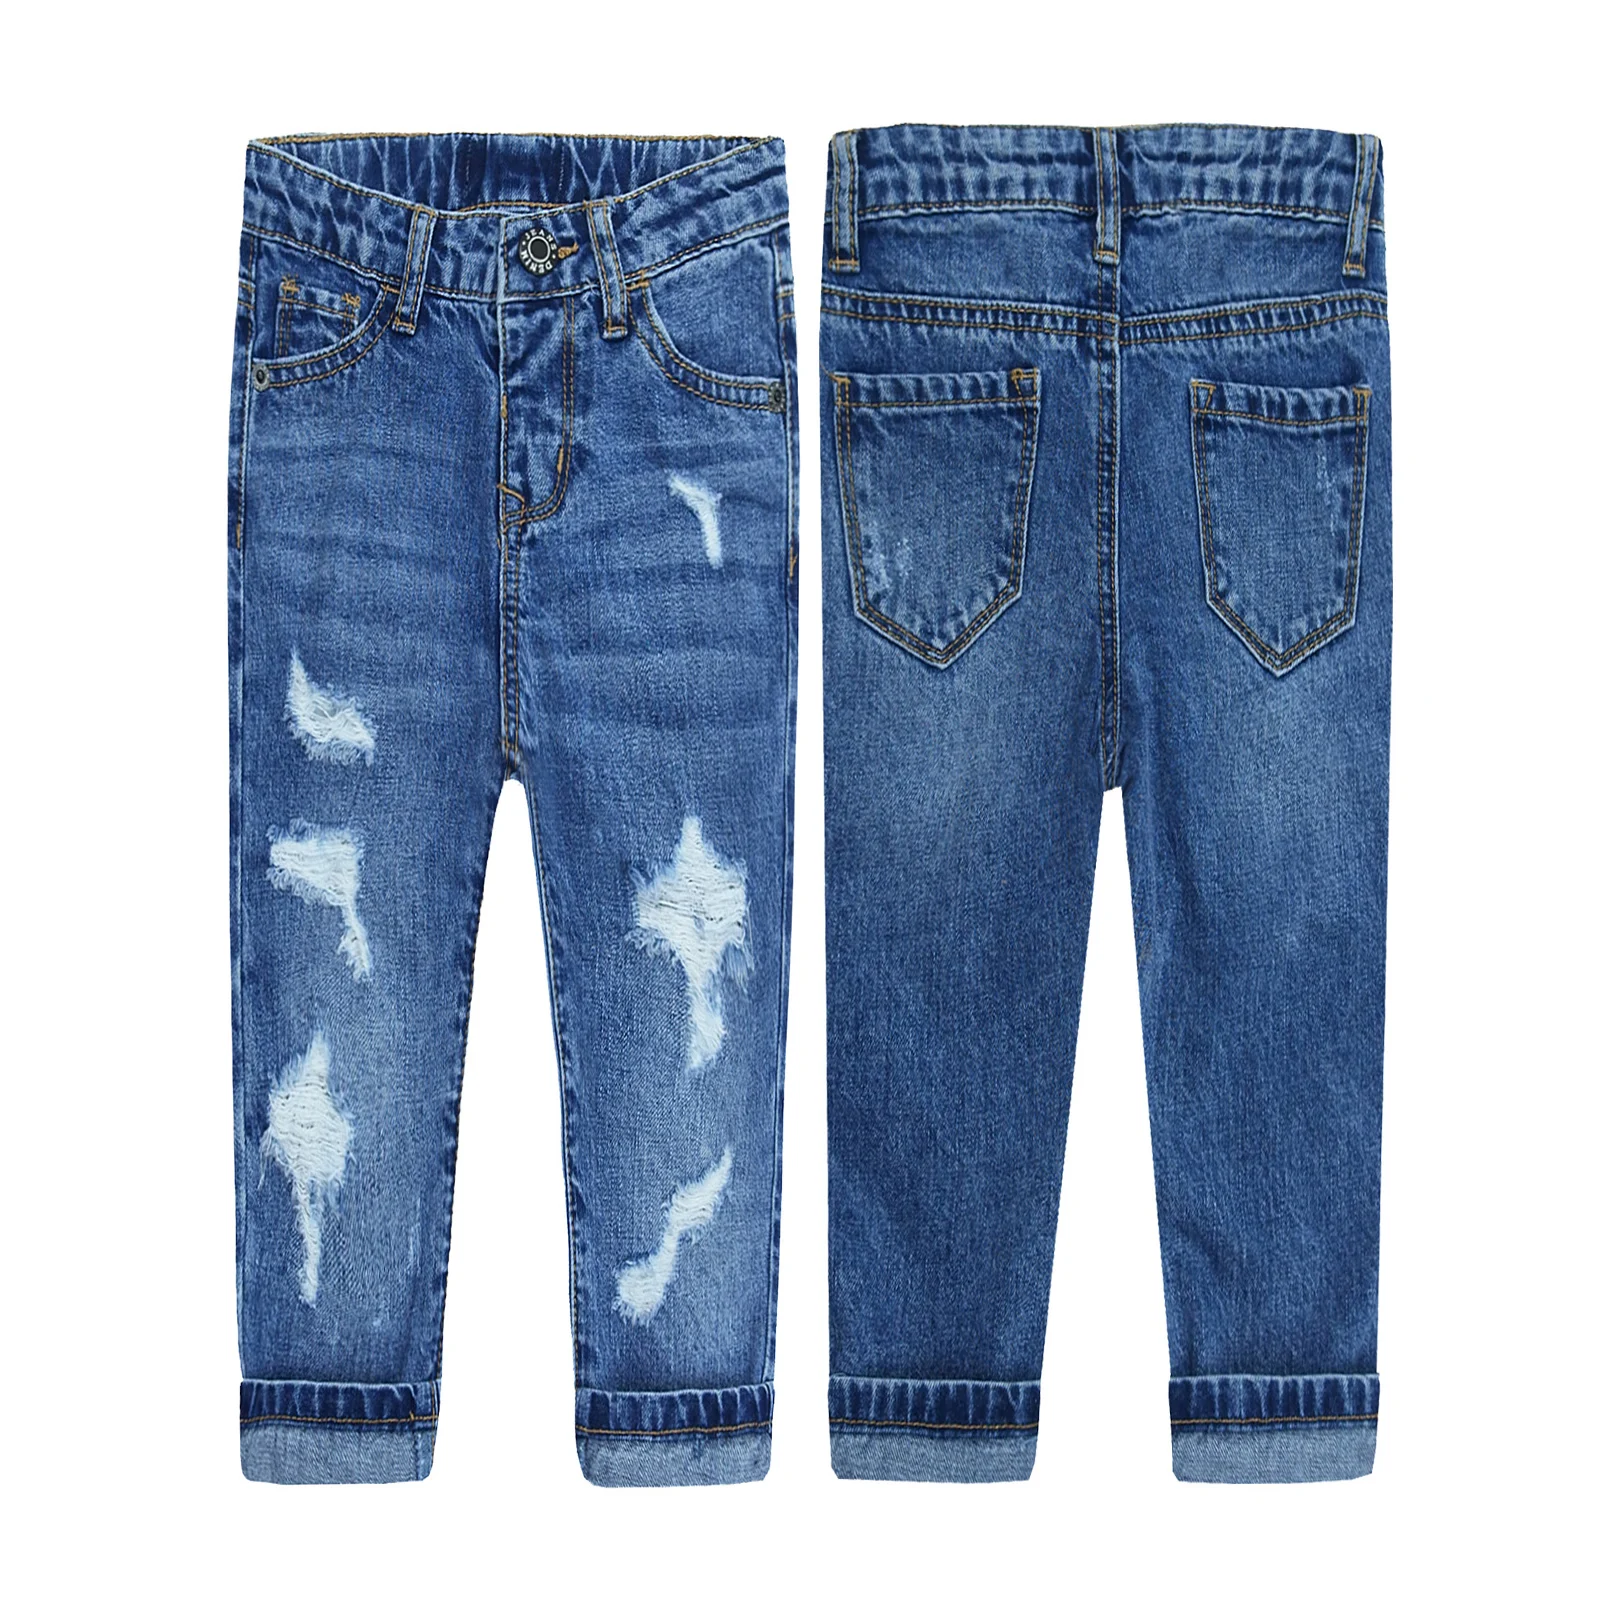 

KIDSCOOL SPACE Baby Little Girl Boy Jeans Teenager Elastic Band Inside Ripped Holes Denim Pants Trousers Bottoms Clothing